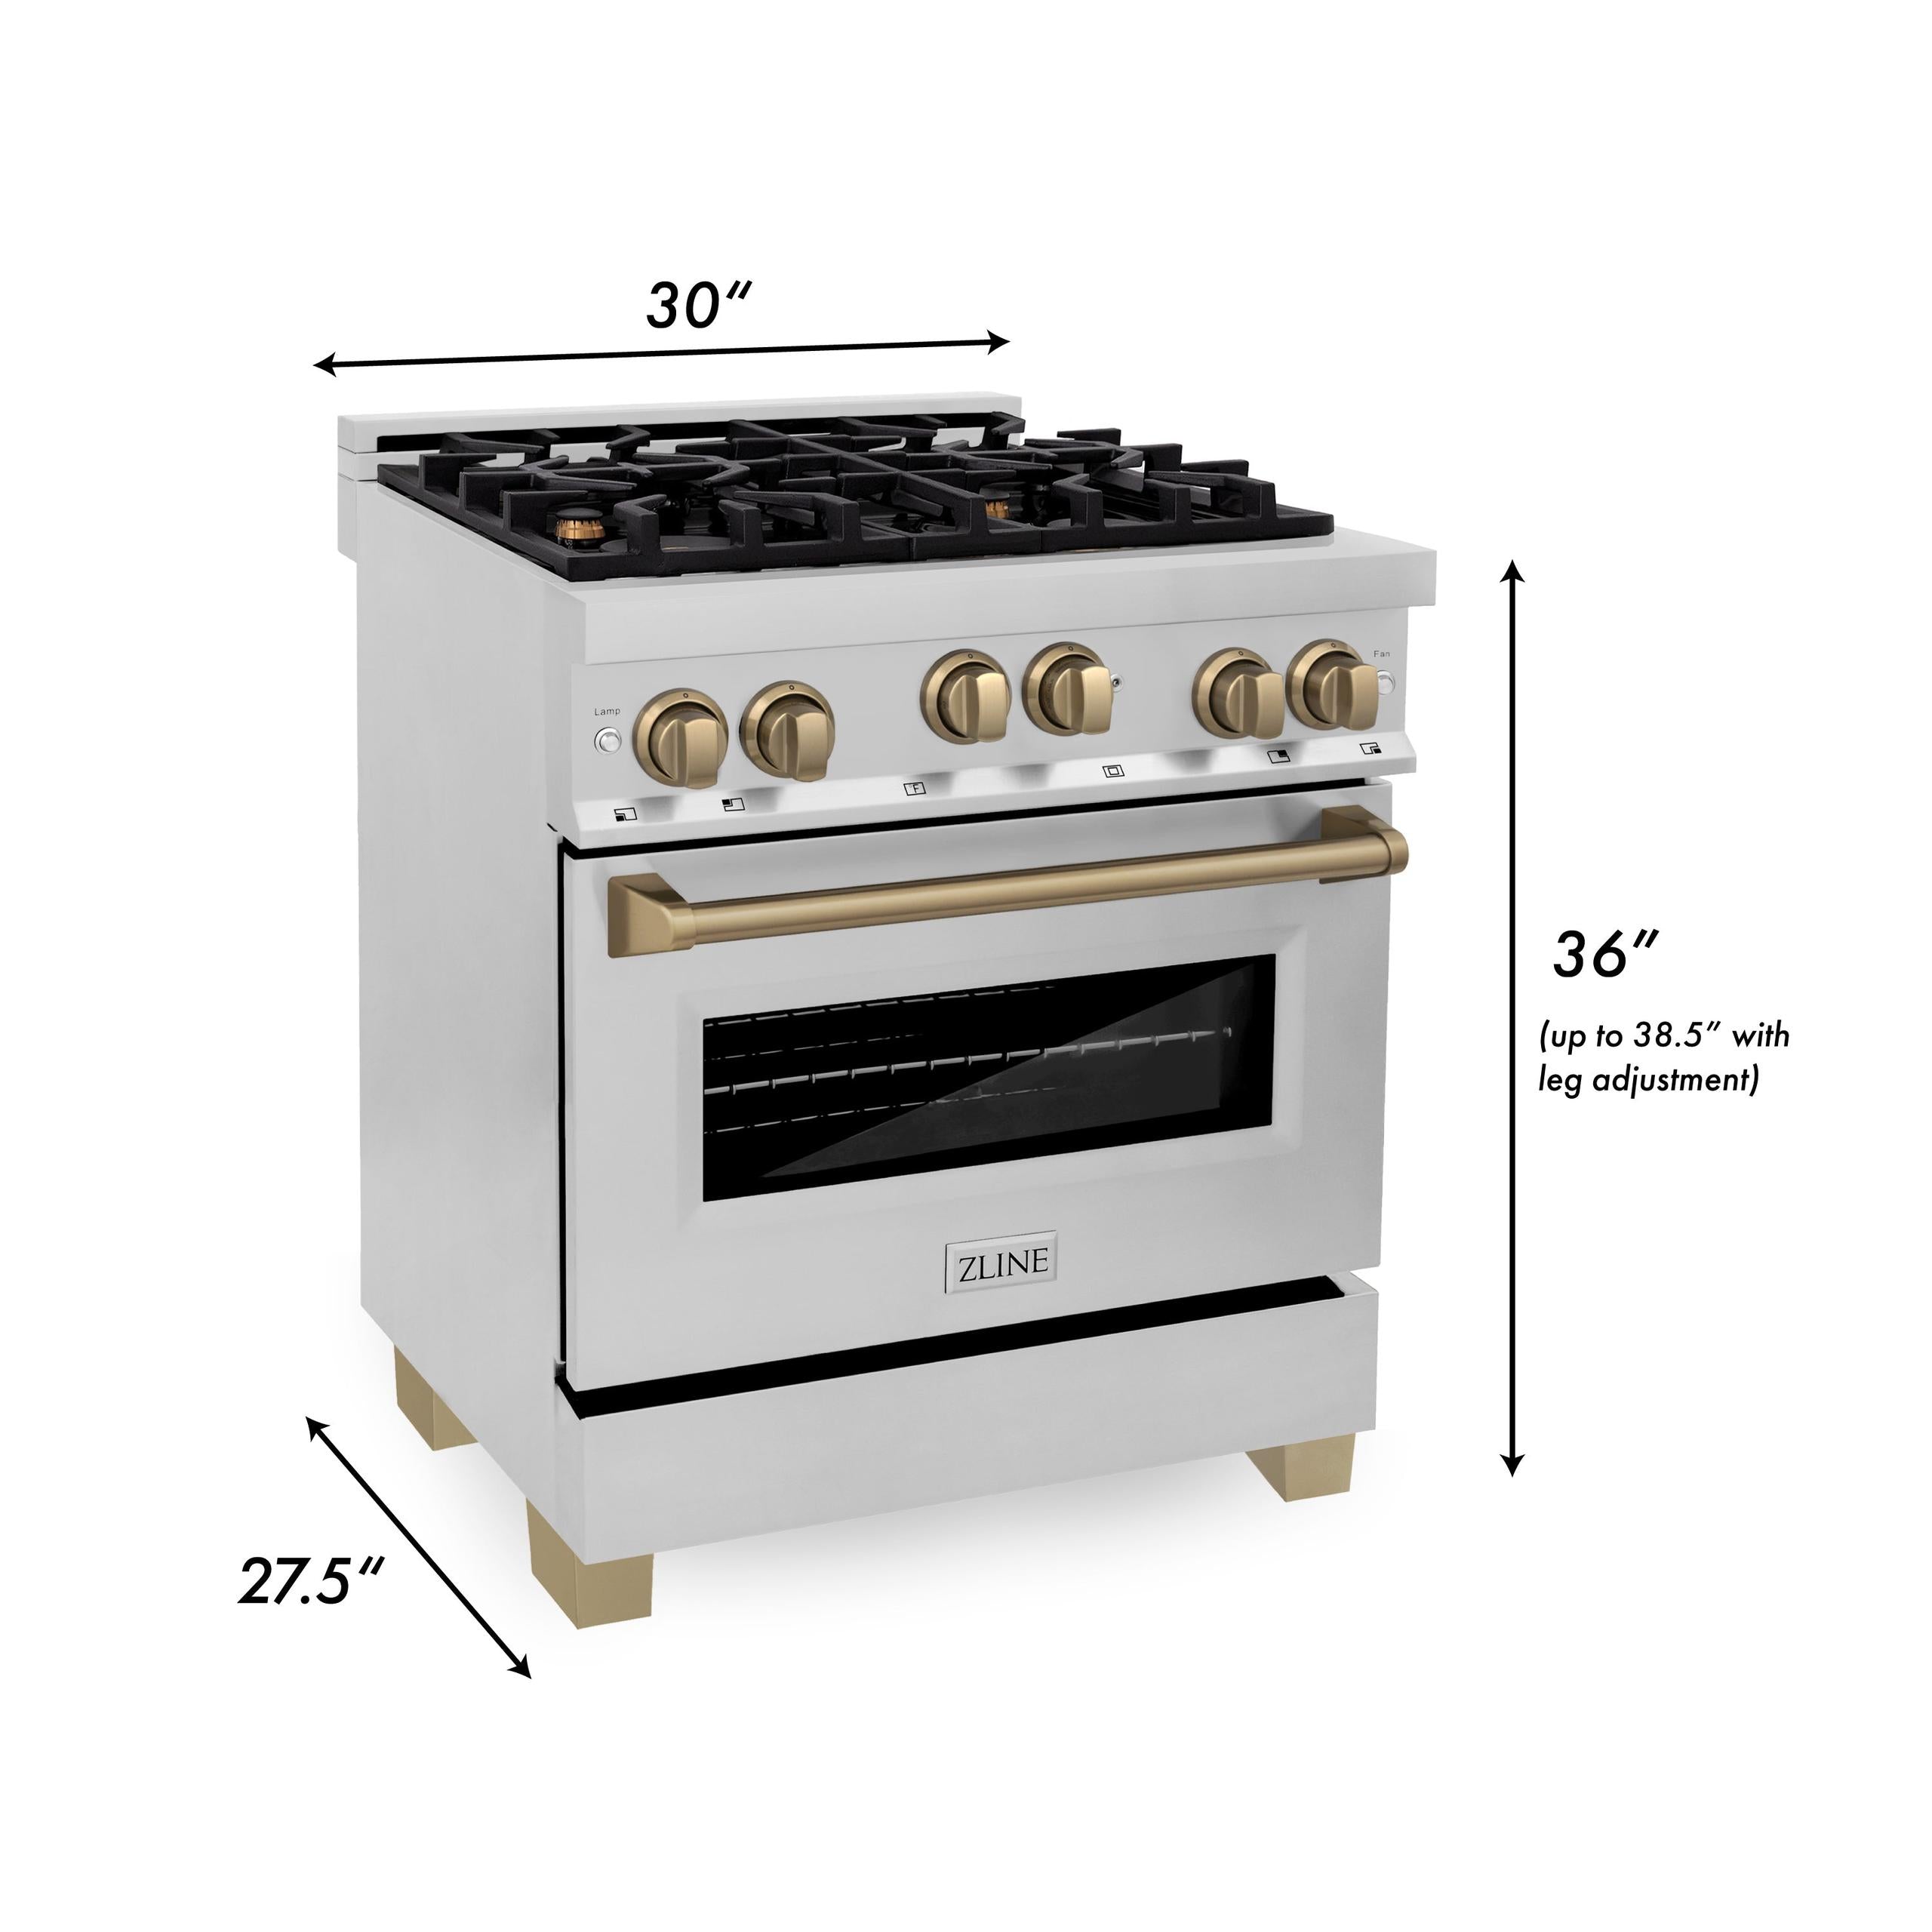 ZLINE KITCHEN AND BATH RGZ30G ZLINE Autograph Edition 30" 4.0 cu. ft. Range with Gas Stove and Gas Oven in Stainless Steel with Accents Color: Gold